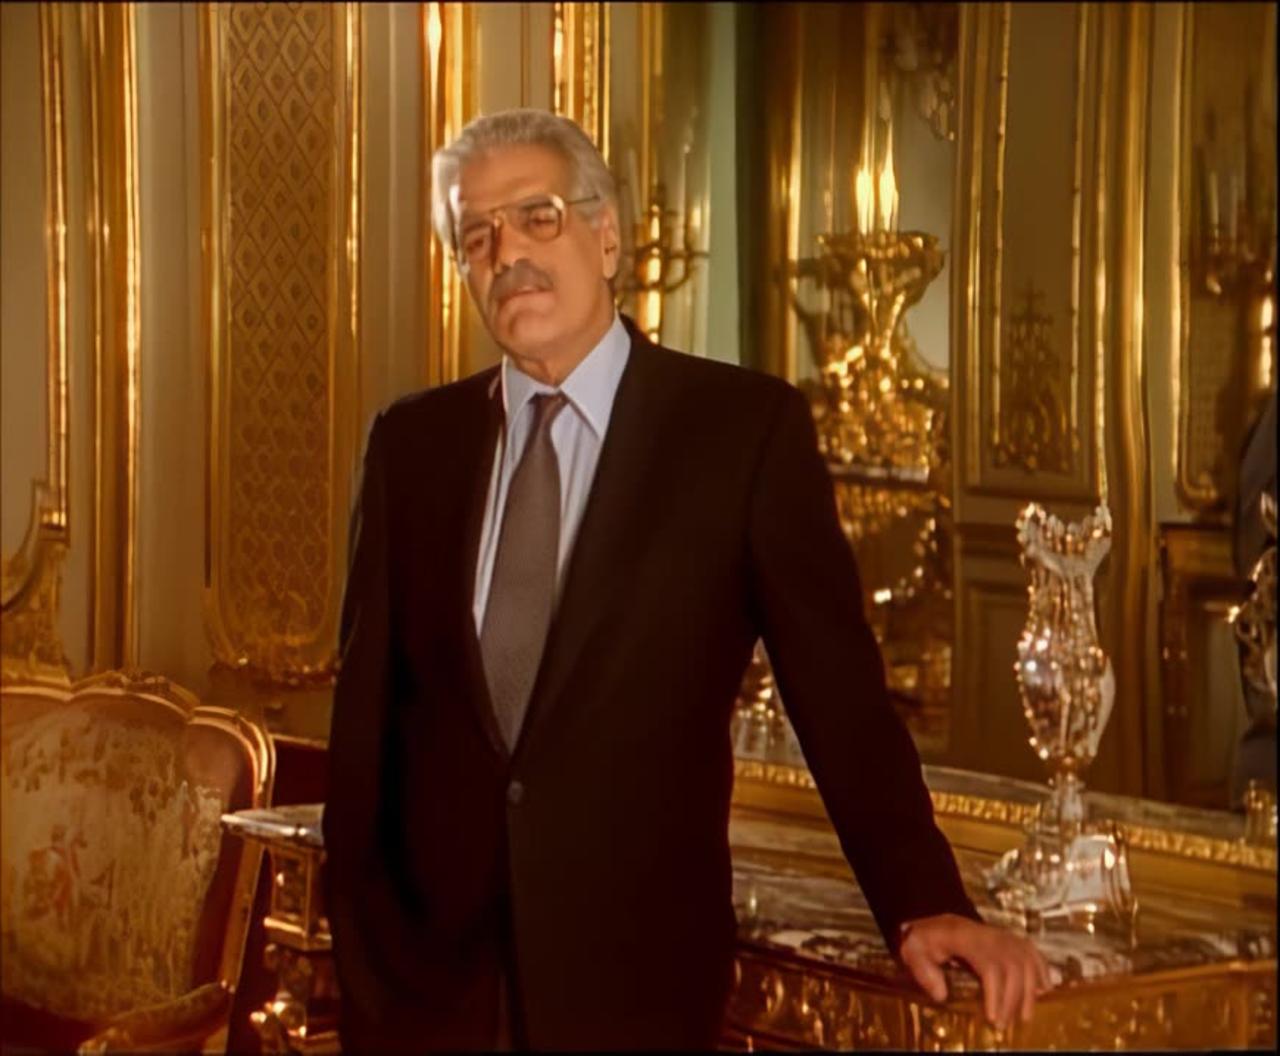 Omar Sharif Introduces The Restored Version of Dr Zhivago (1965)